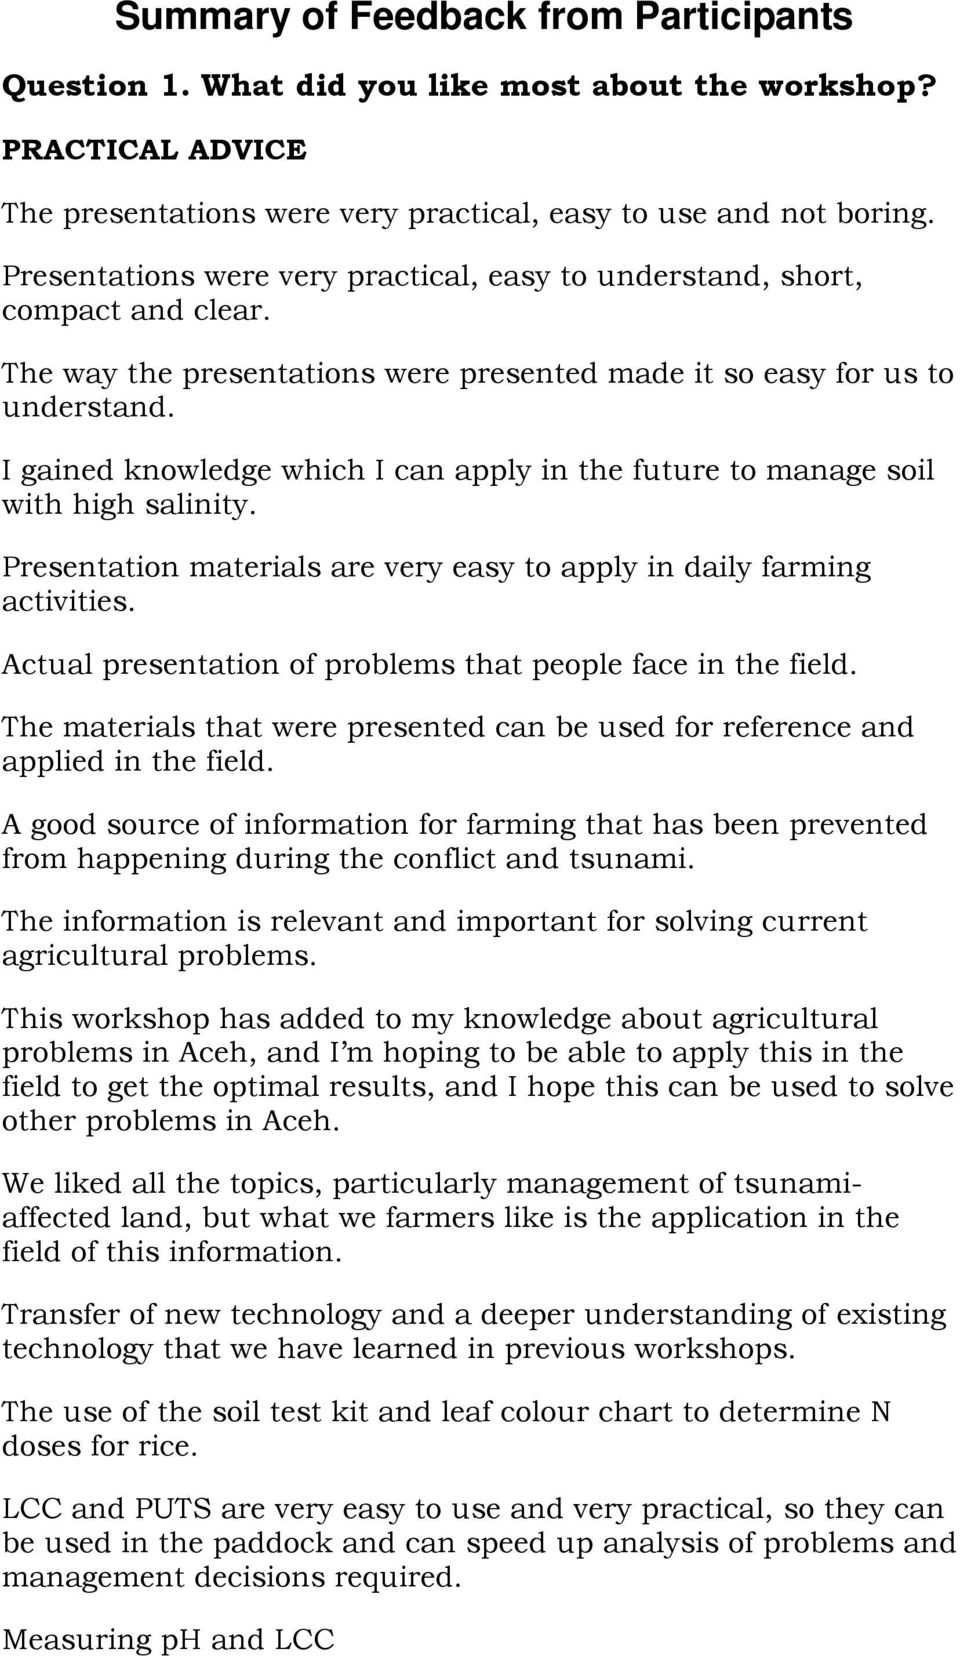 I gained knowledge which I can apply in the future to manage soil with high salinity. Presentation materials are very easy to apply in daily farming activities.